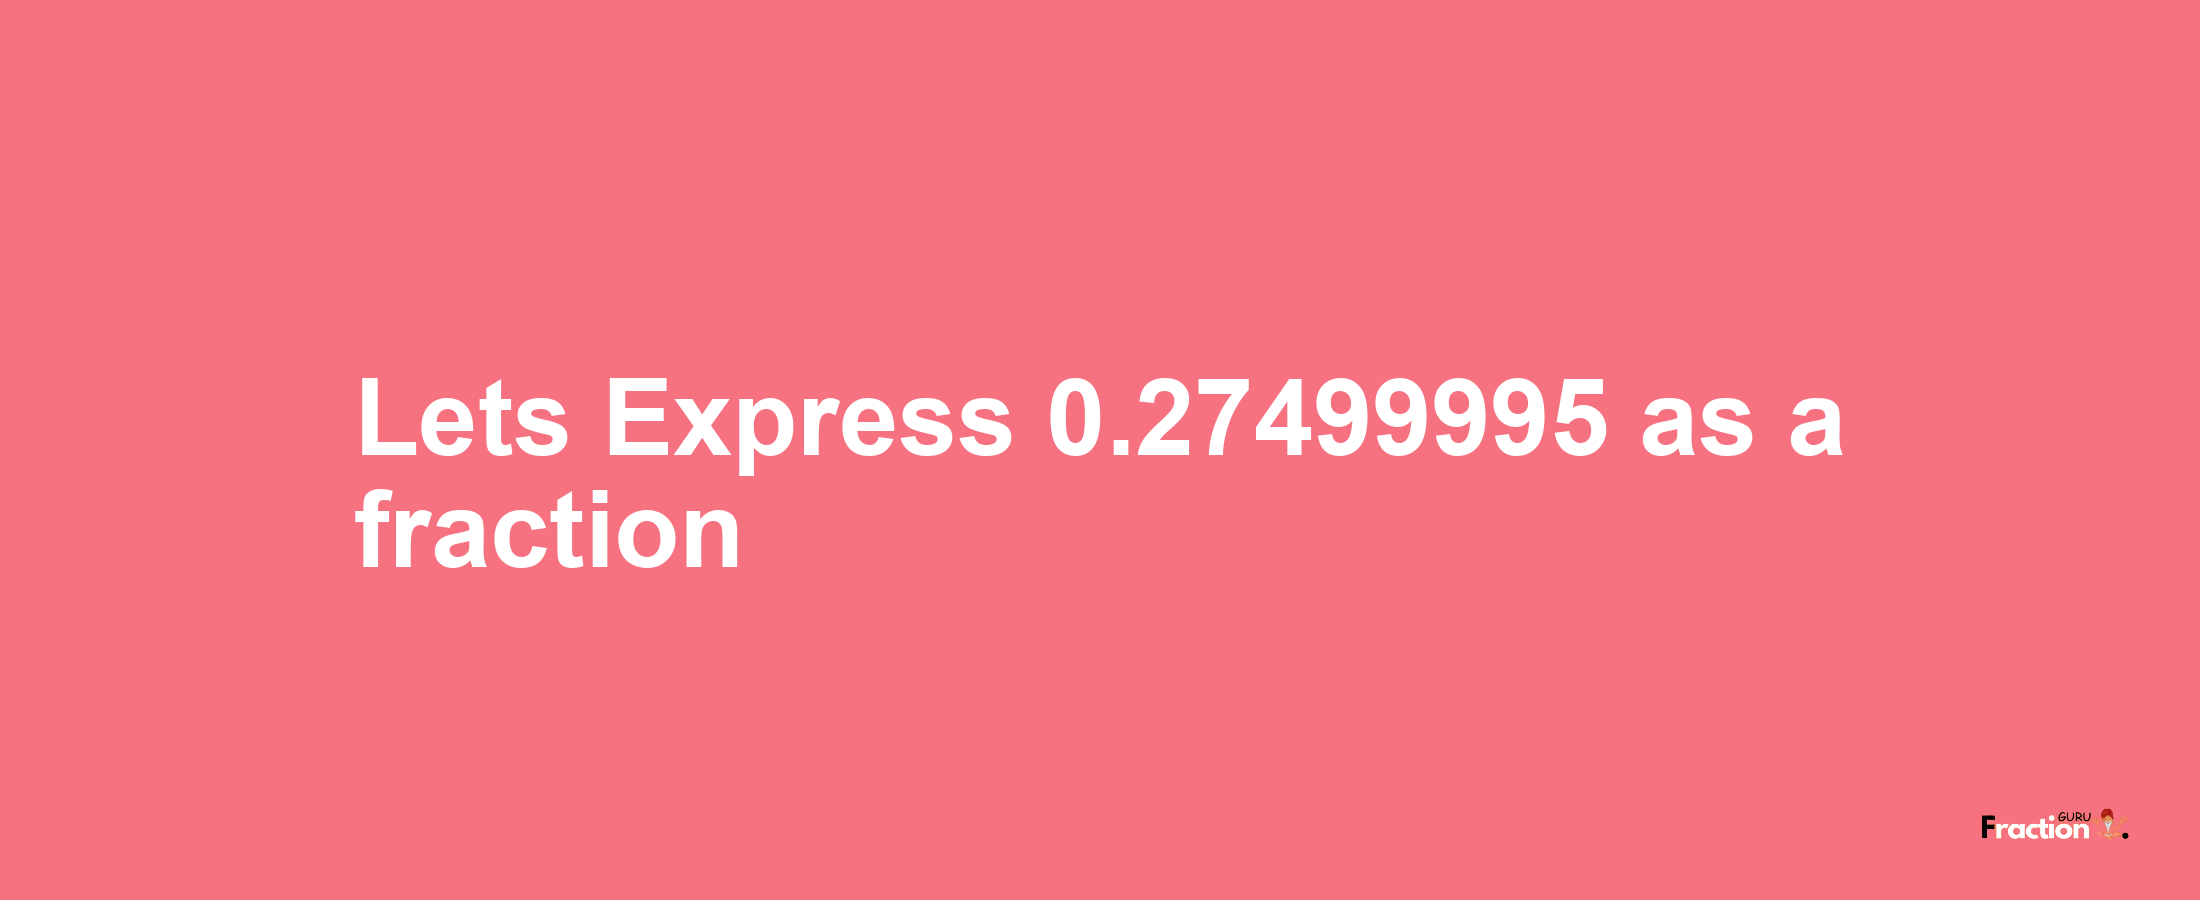 Lets Express 0.27499995 as afraction